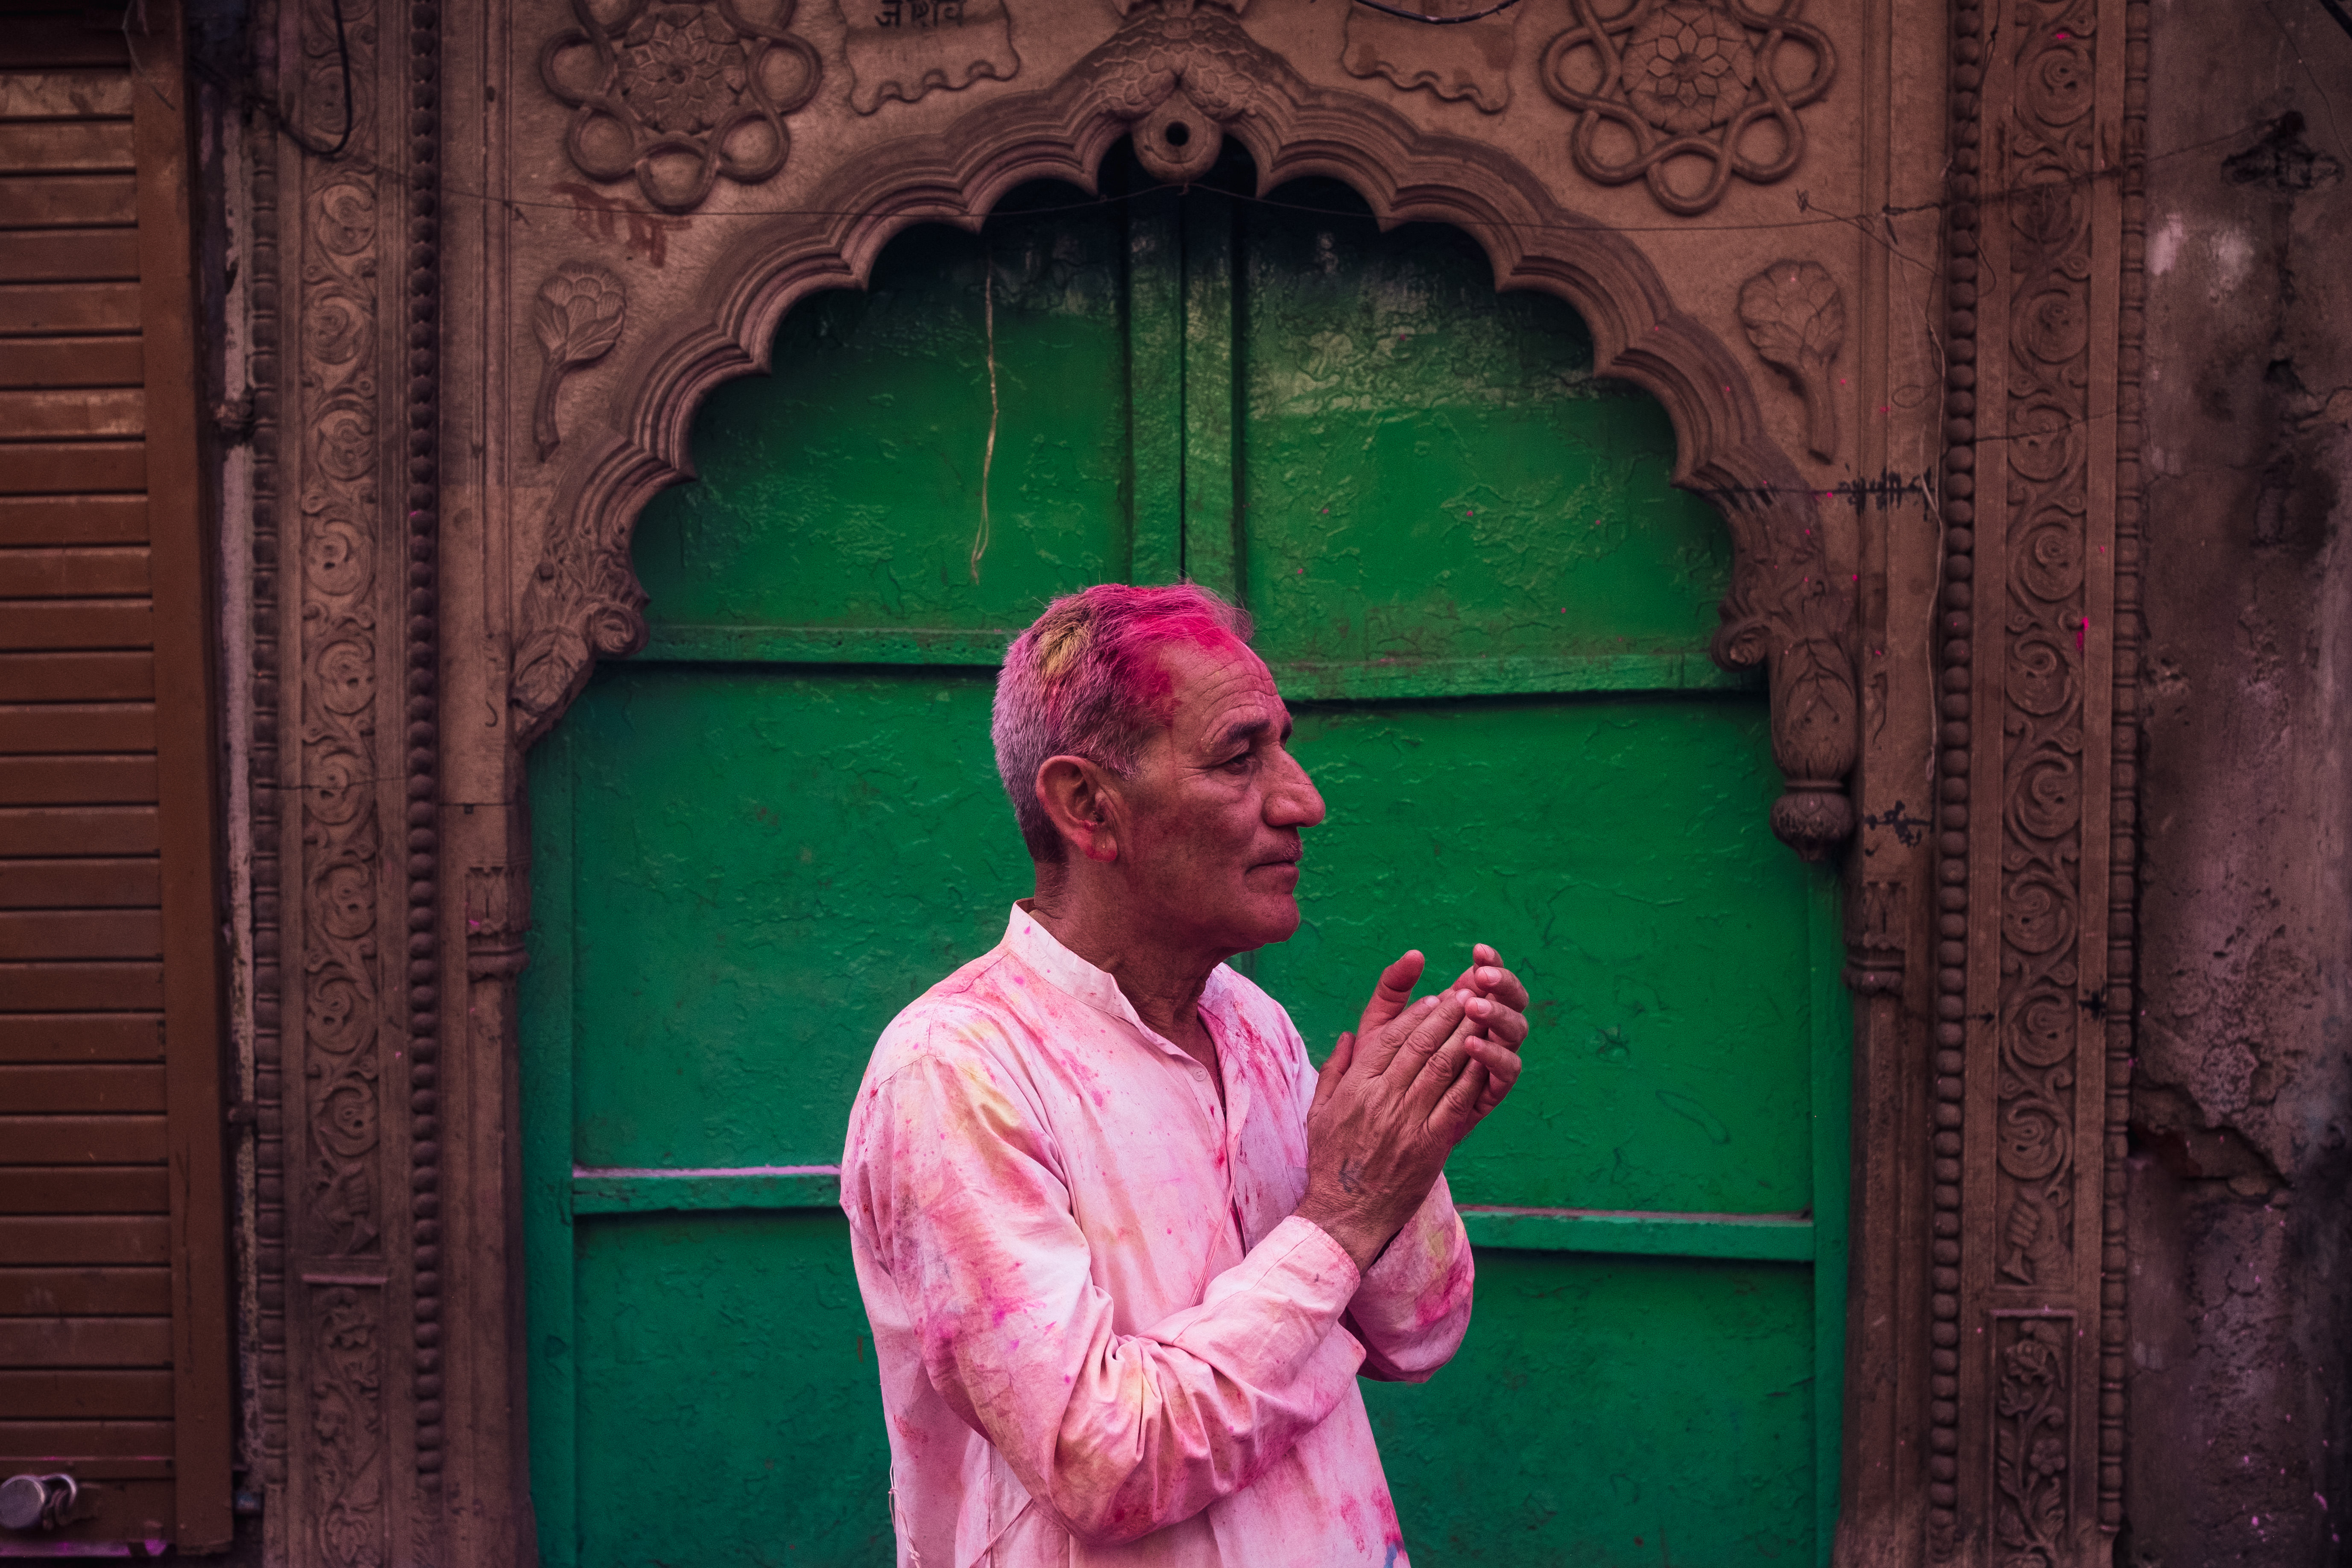 India Street Photography During Holi Festival. man covered in pink stand in front of green door. Images by Jason Vinson